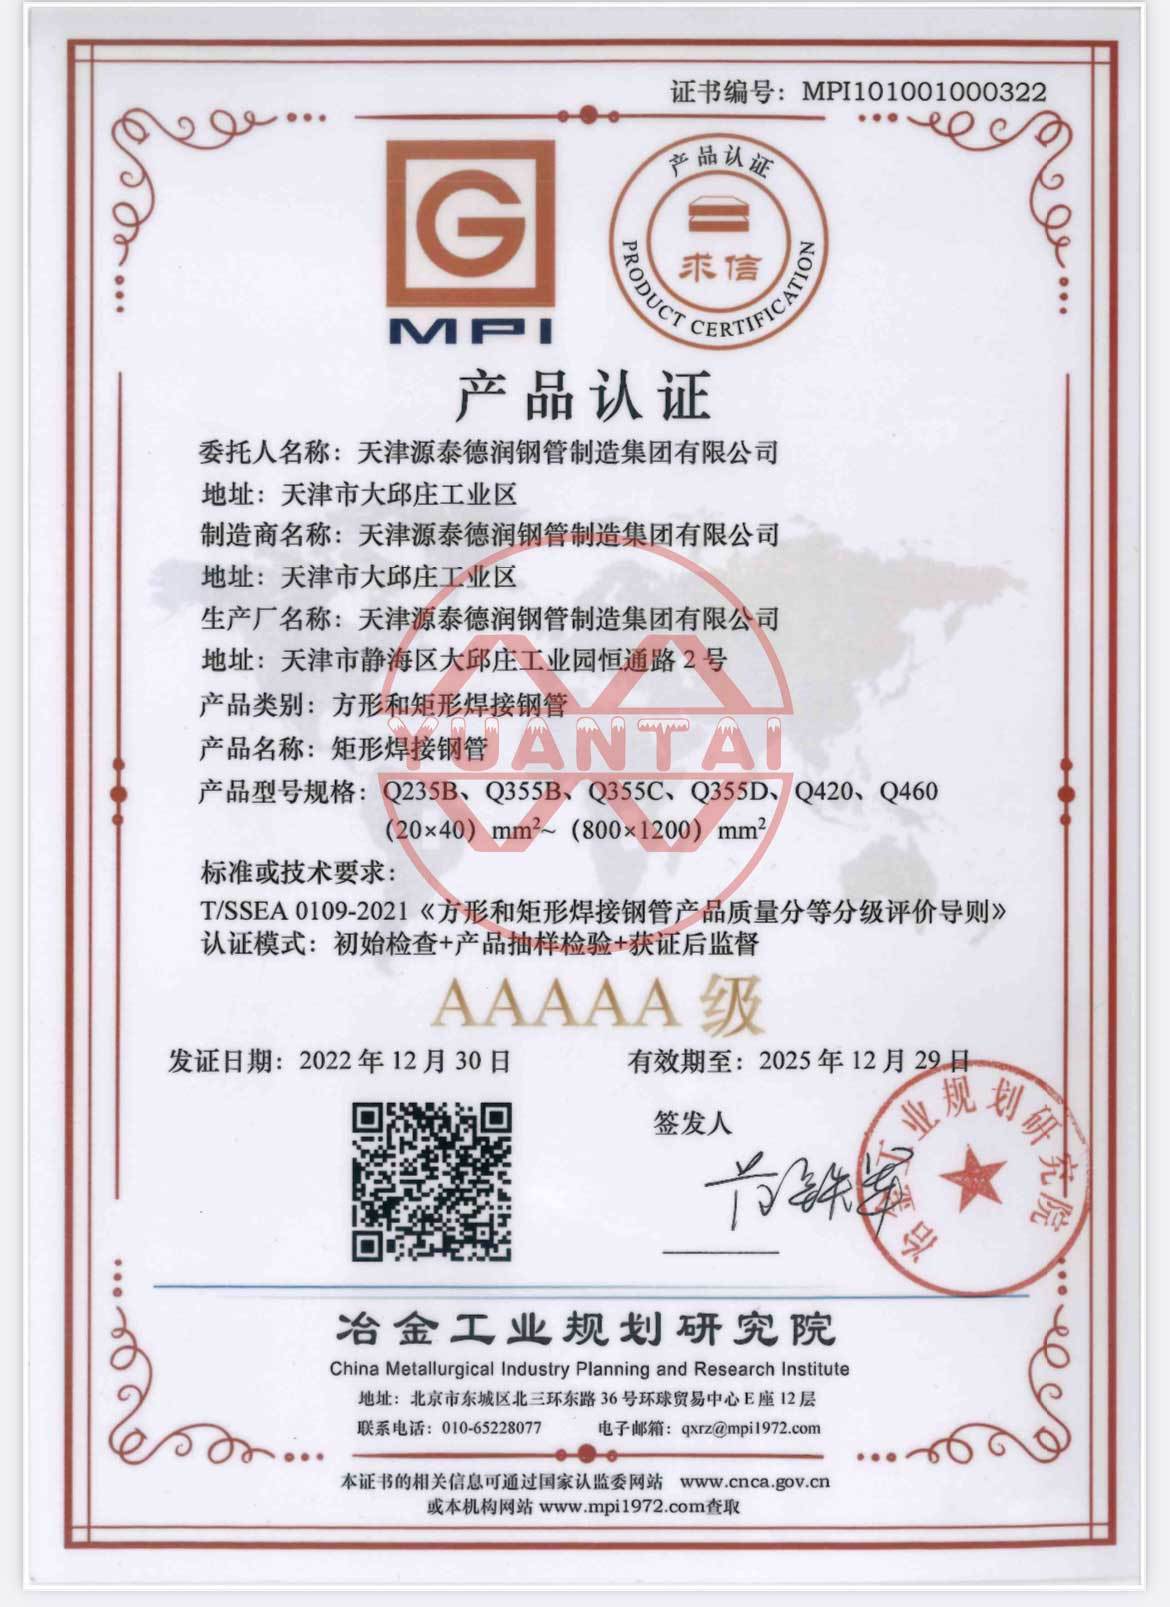 square and rectangular welded steel pipe obtained the AAAAA product certification